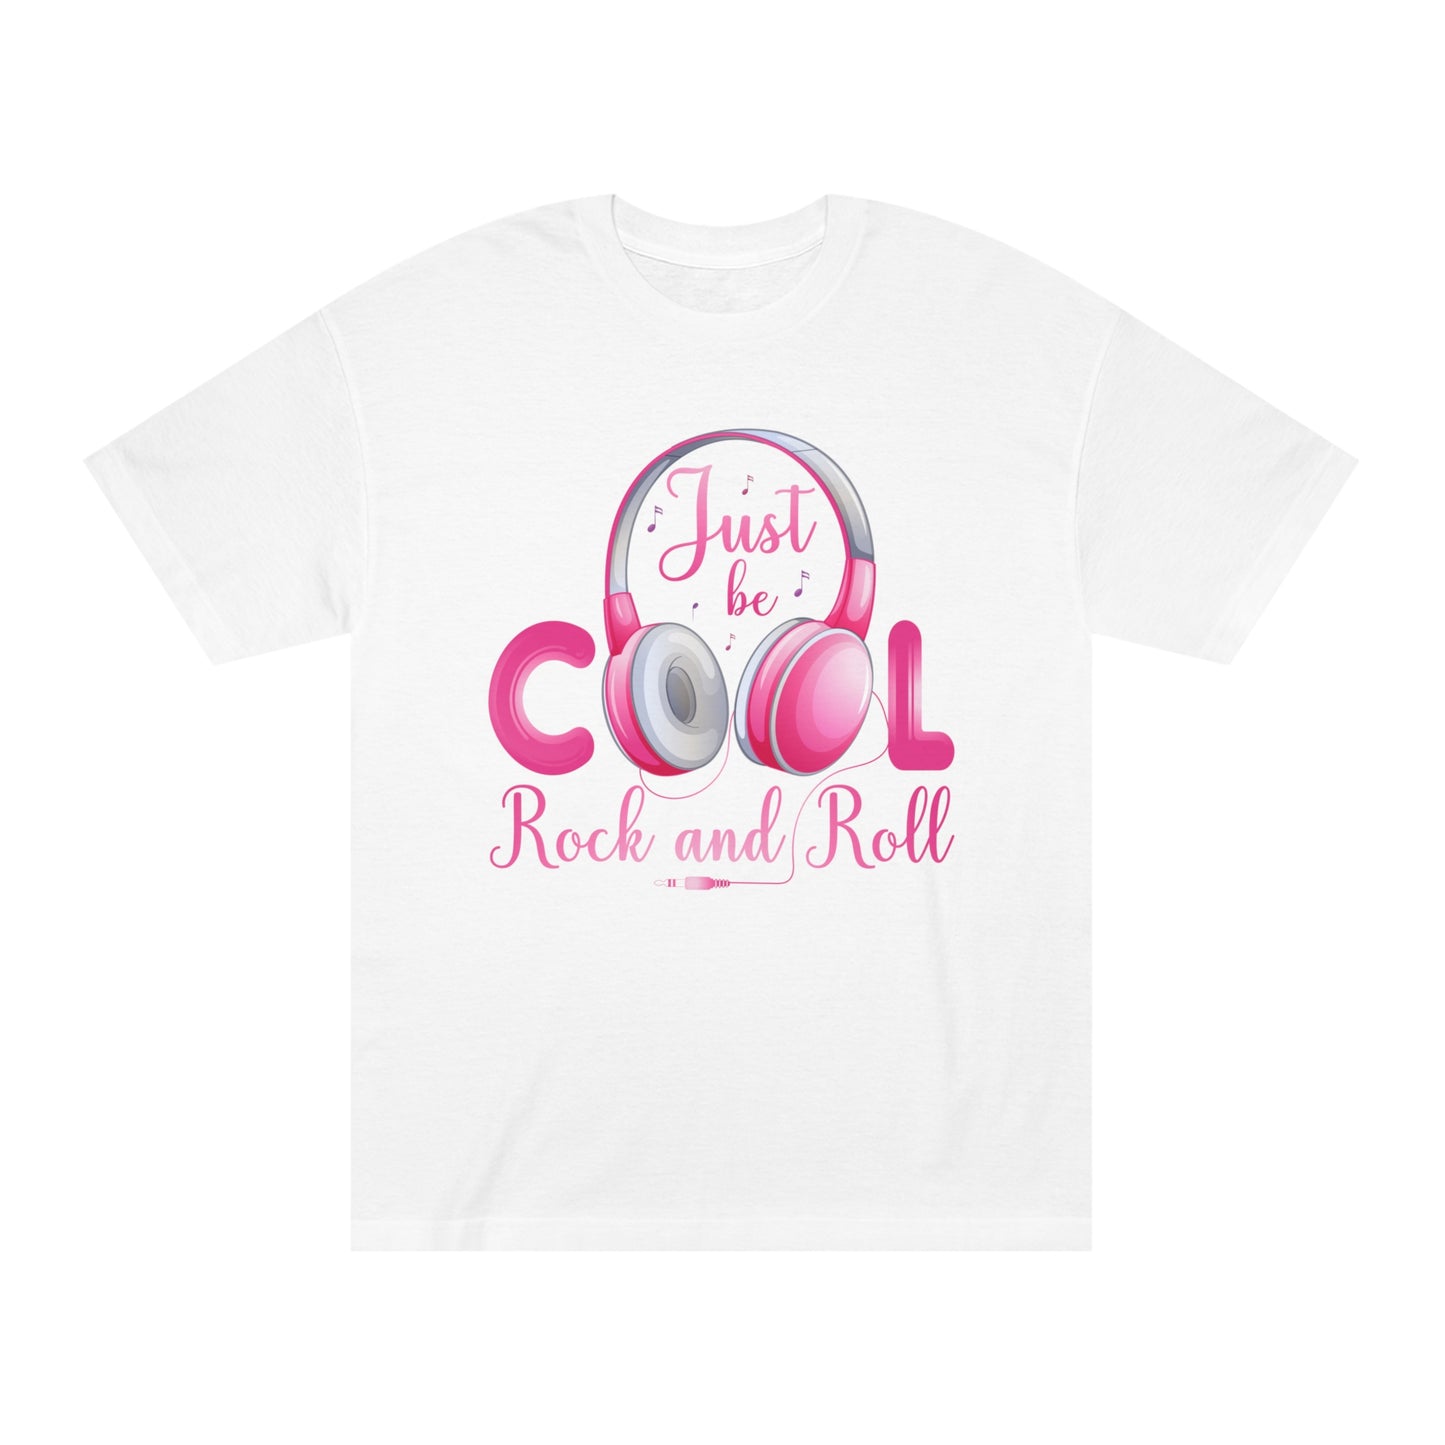 Just be cool rock and roll Unisex Classic Tee